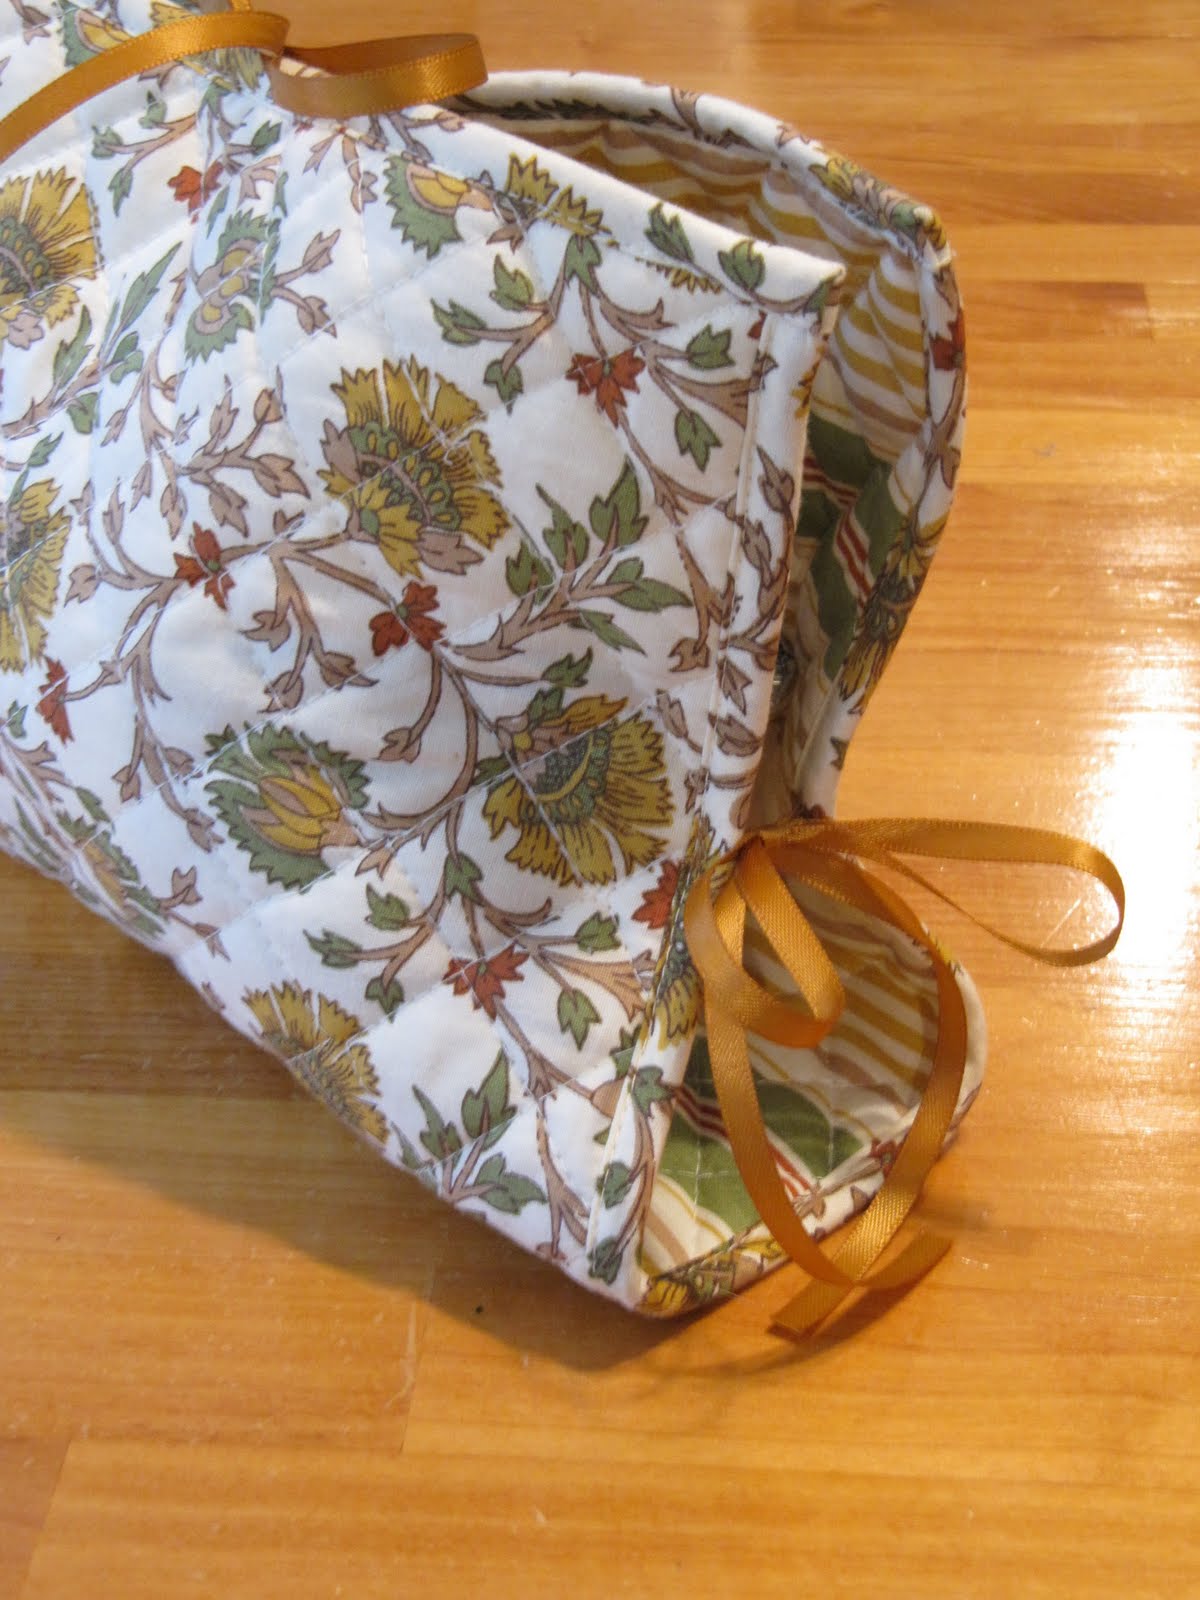 Sew Many Ways...: Tool Time Tuesday...Easy Casserole Carriers, Gift Ideas